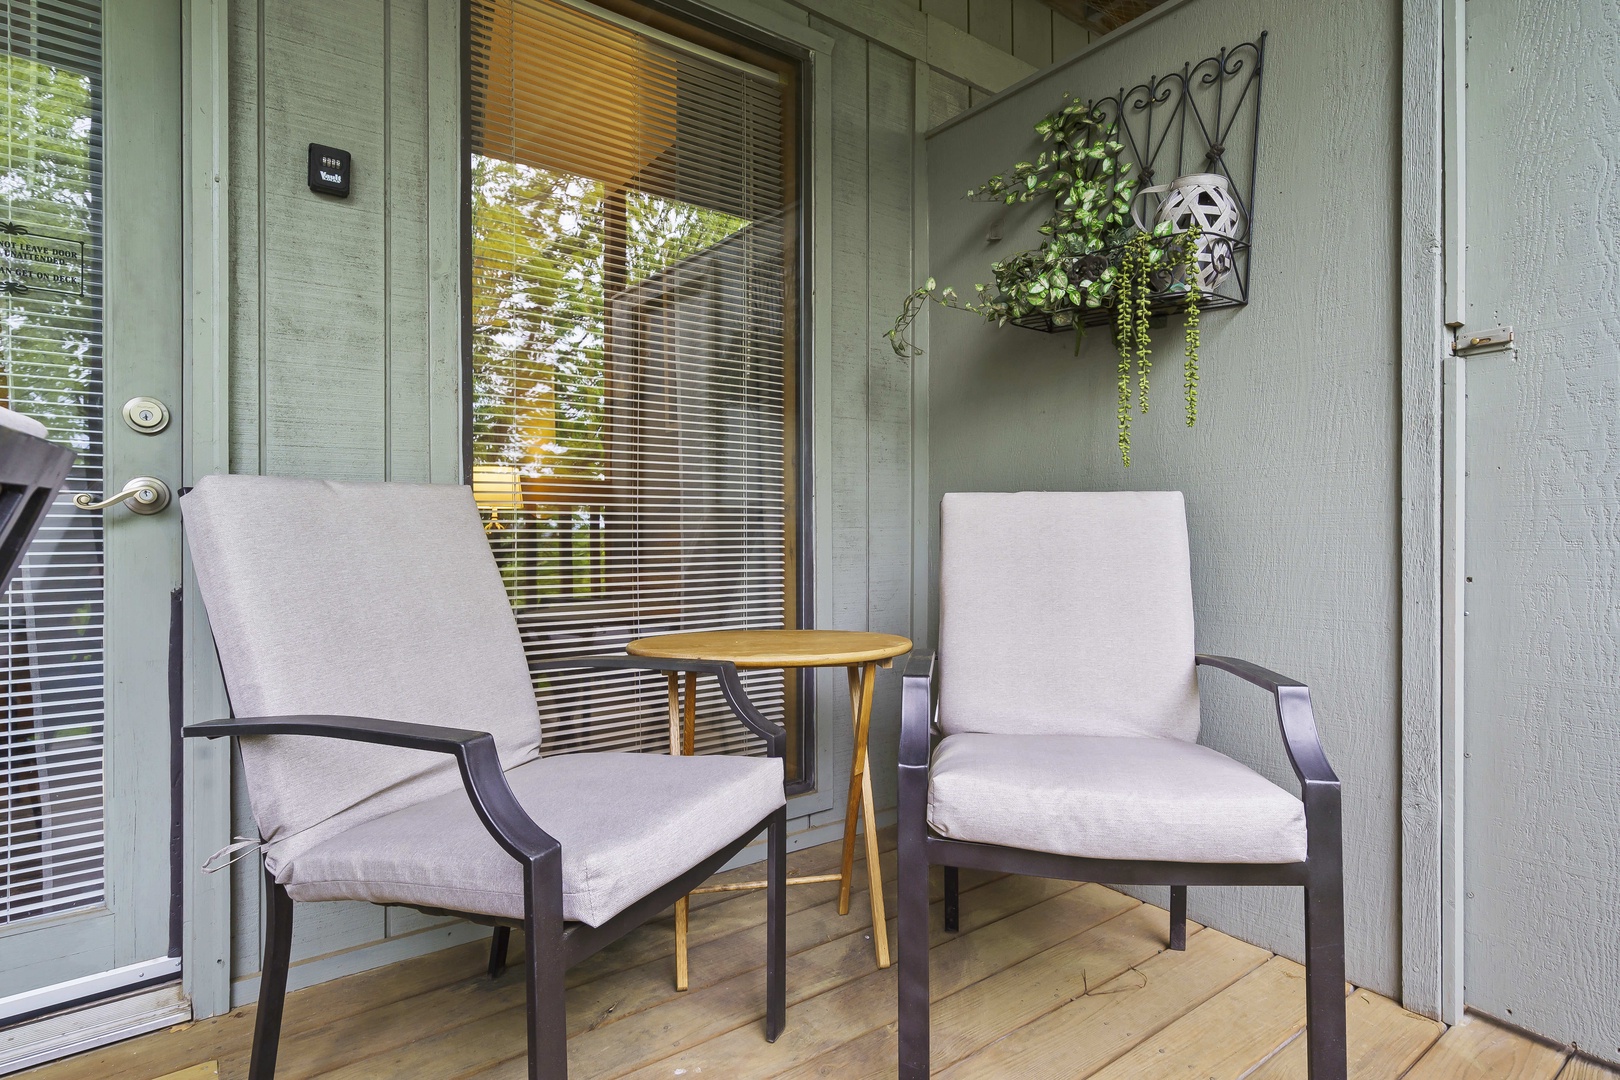 Panoramic view from the covered deck with swing and outdoor seating (unit 8)